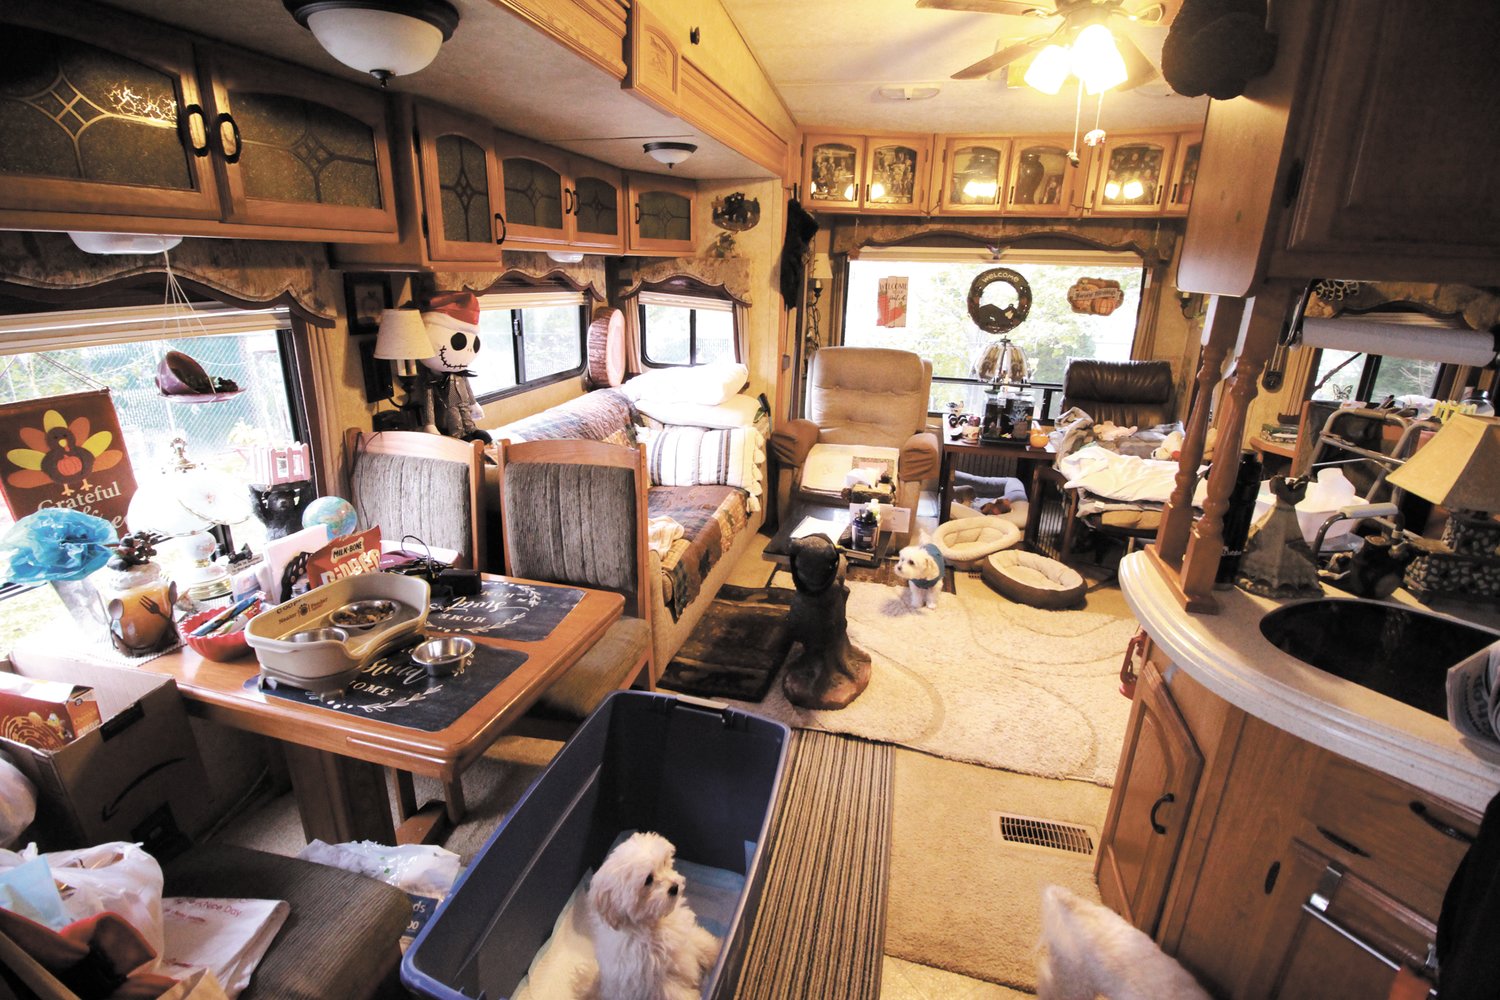 LIVED IN: The trailer interior offers everything Scott needs. He prefers to use it to his home on Warwick Neck because of its easy access.